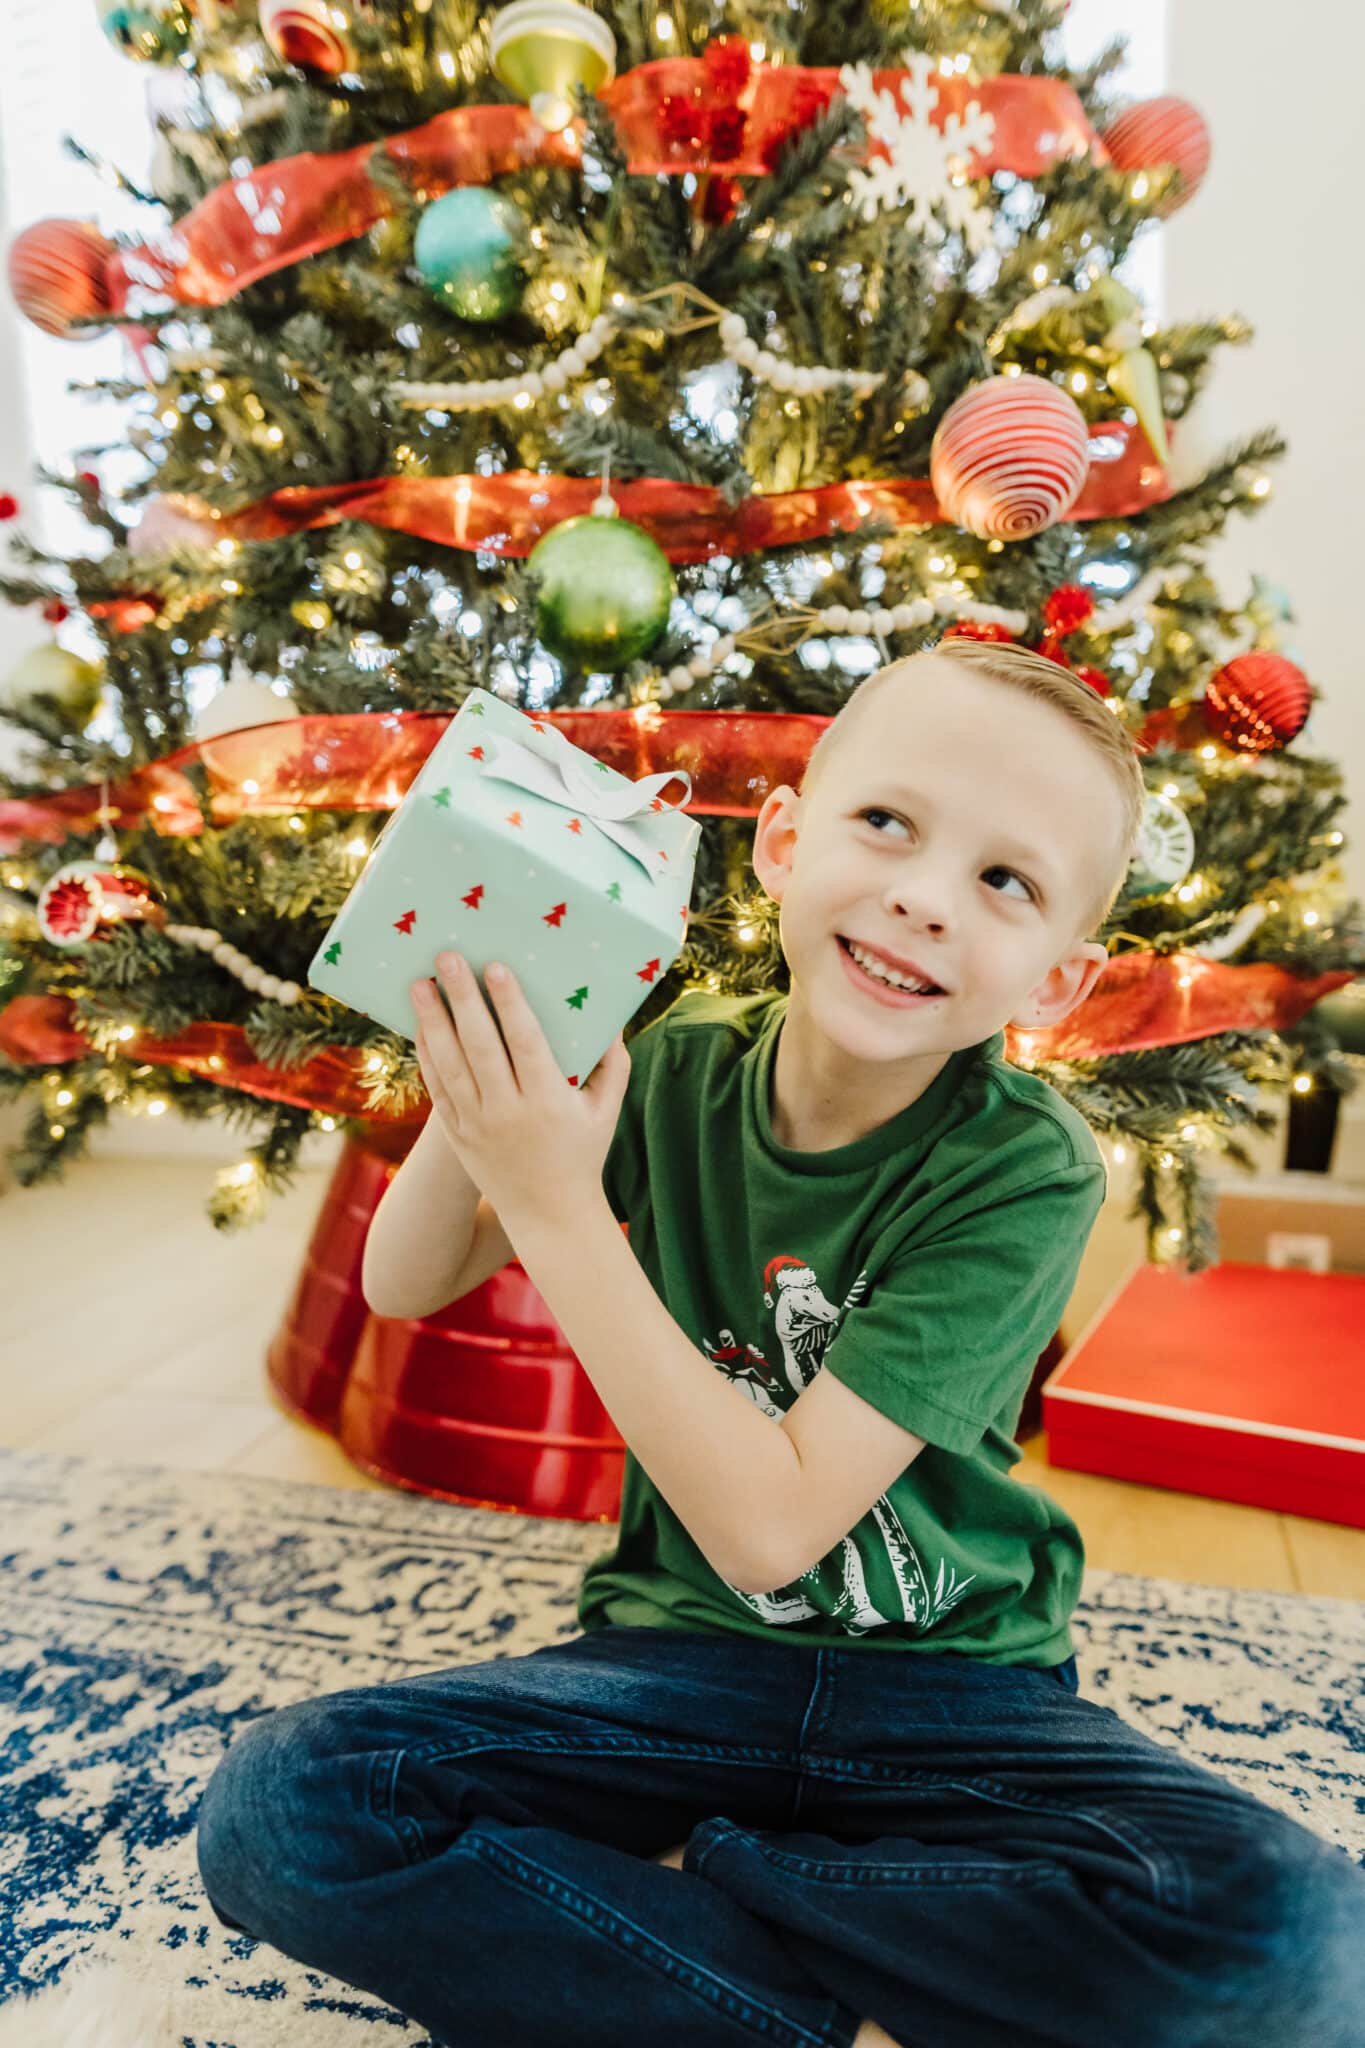 Christmas Gift Ideas for a 7-Year-Old Boy